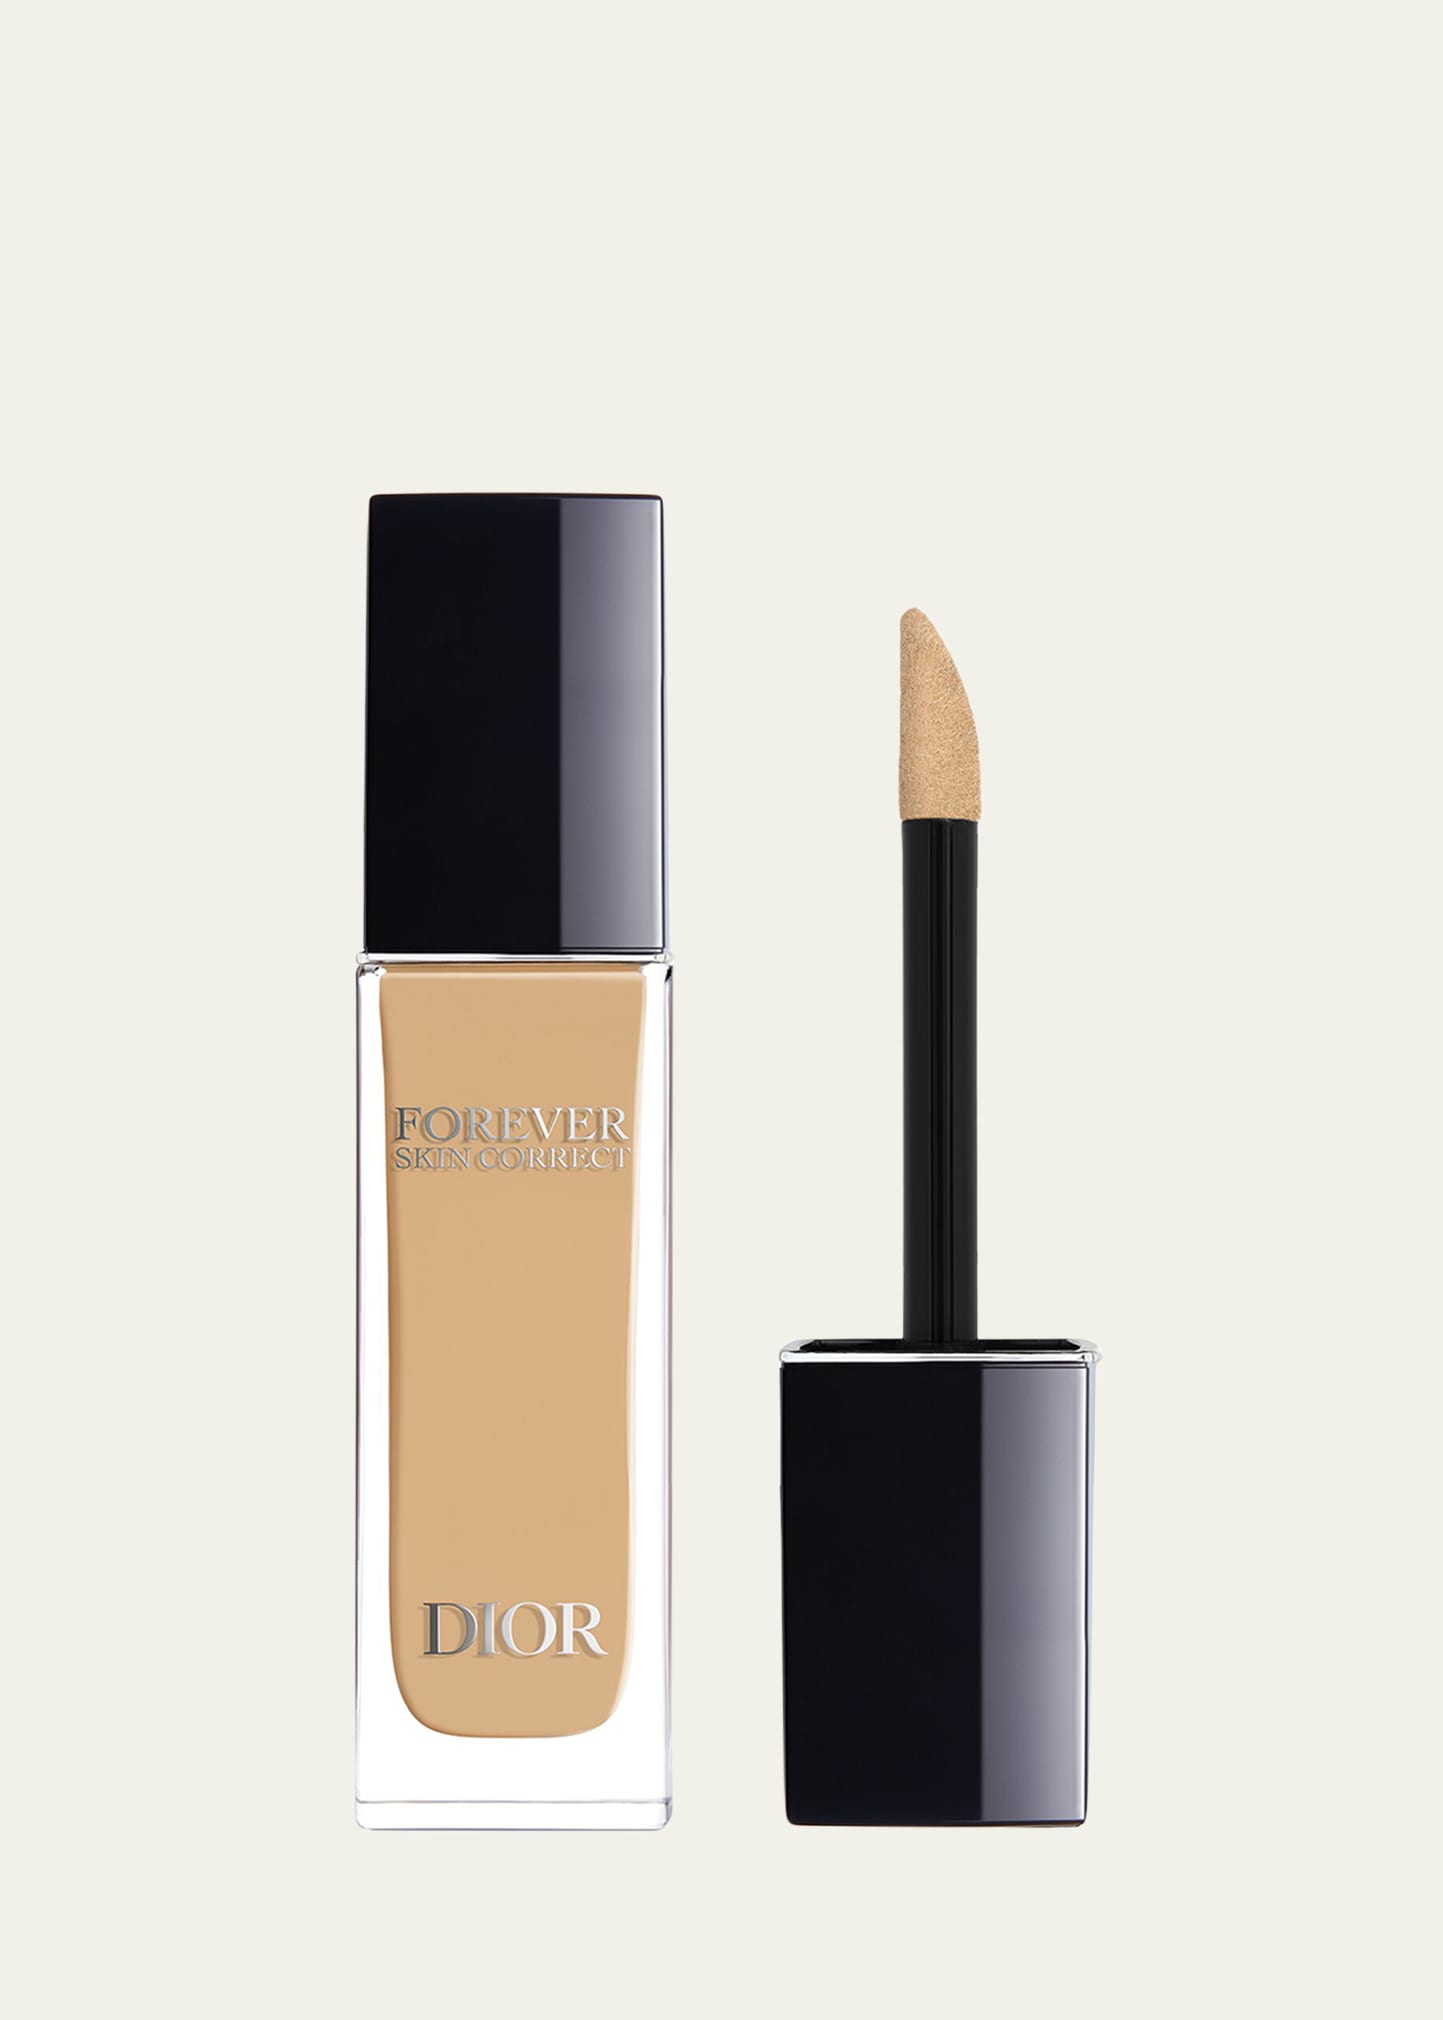 Dior Forever Skin Correct Full-coverage Concealer In 3 Wo Warm Olive